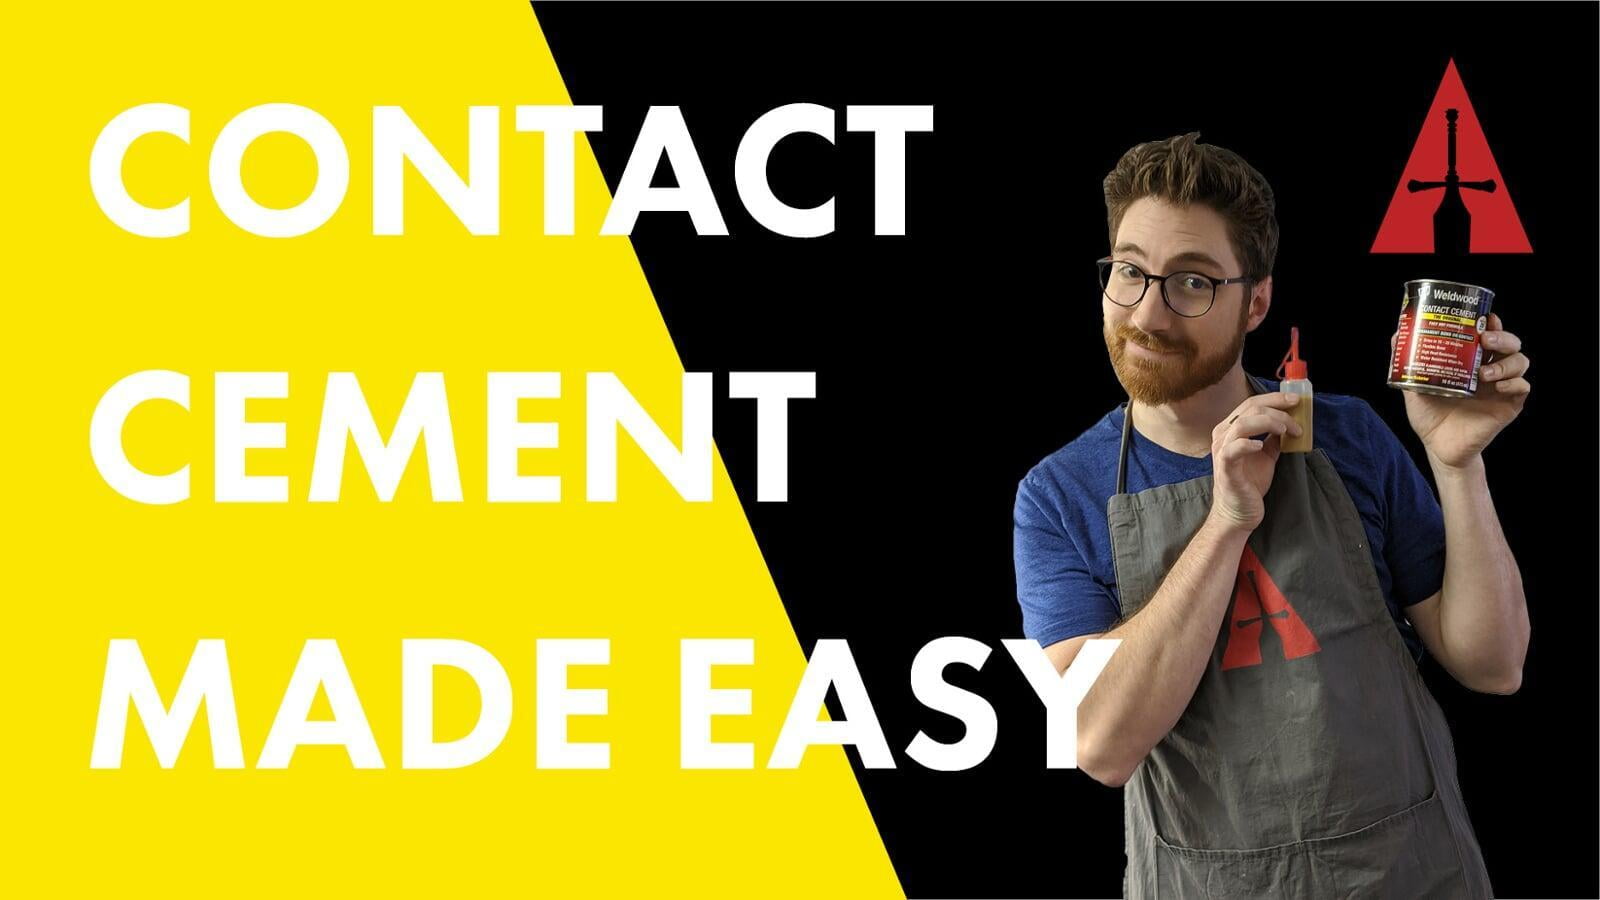 Applying contact cement made easy - Cosplay Quick Tip Clip